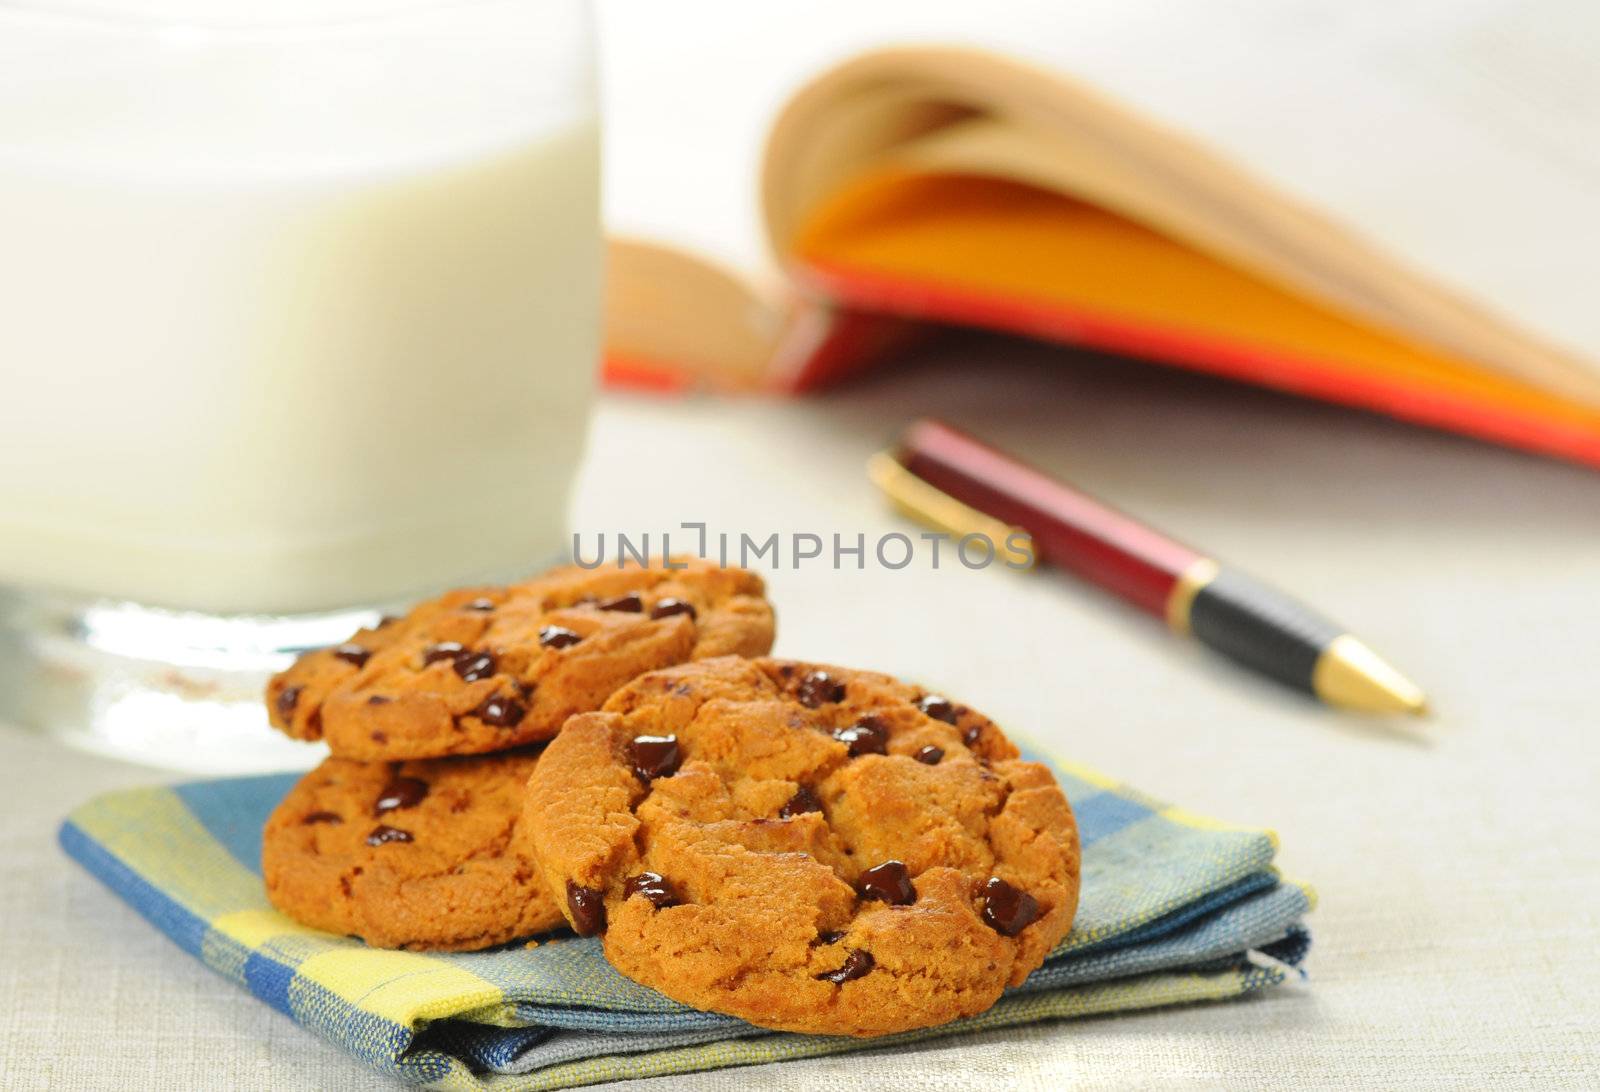 Tasty snack of chocolate chip cookies and milk.